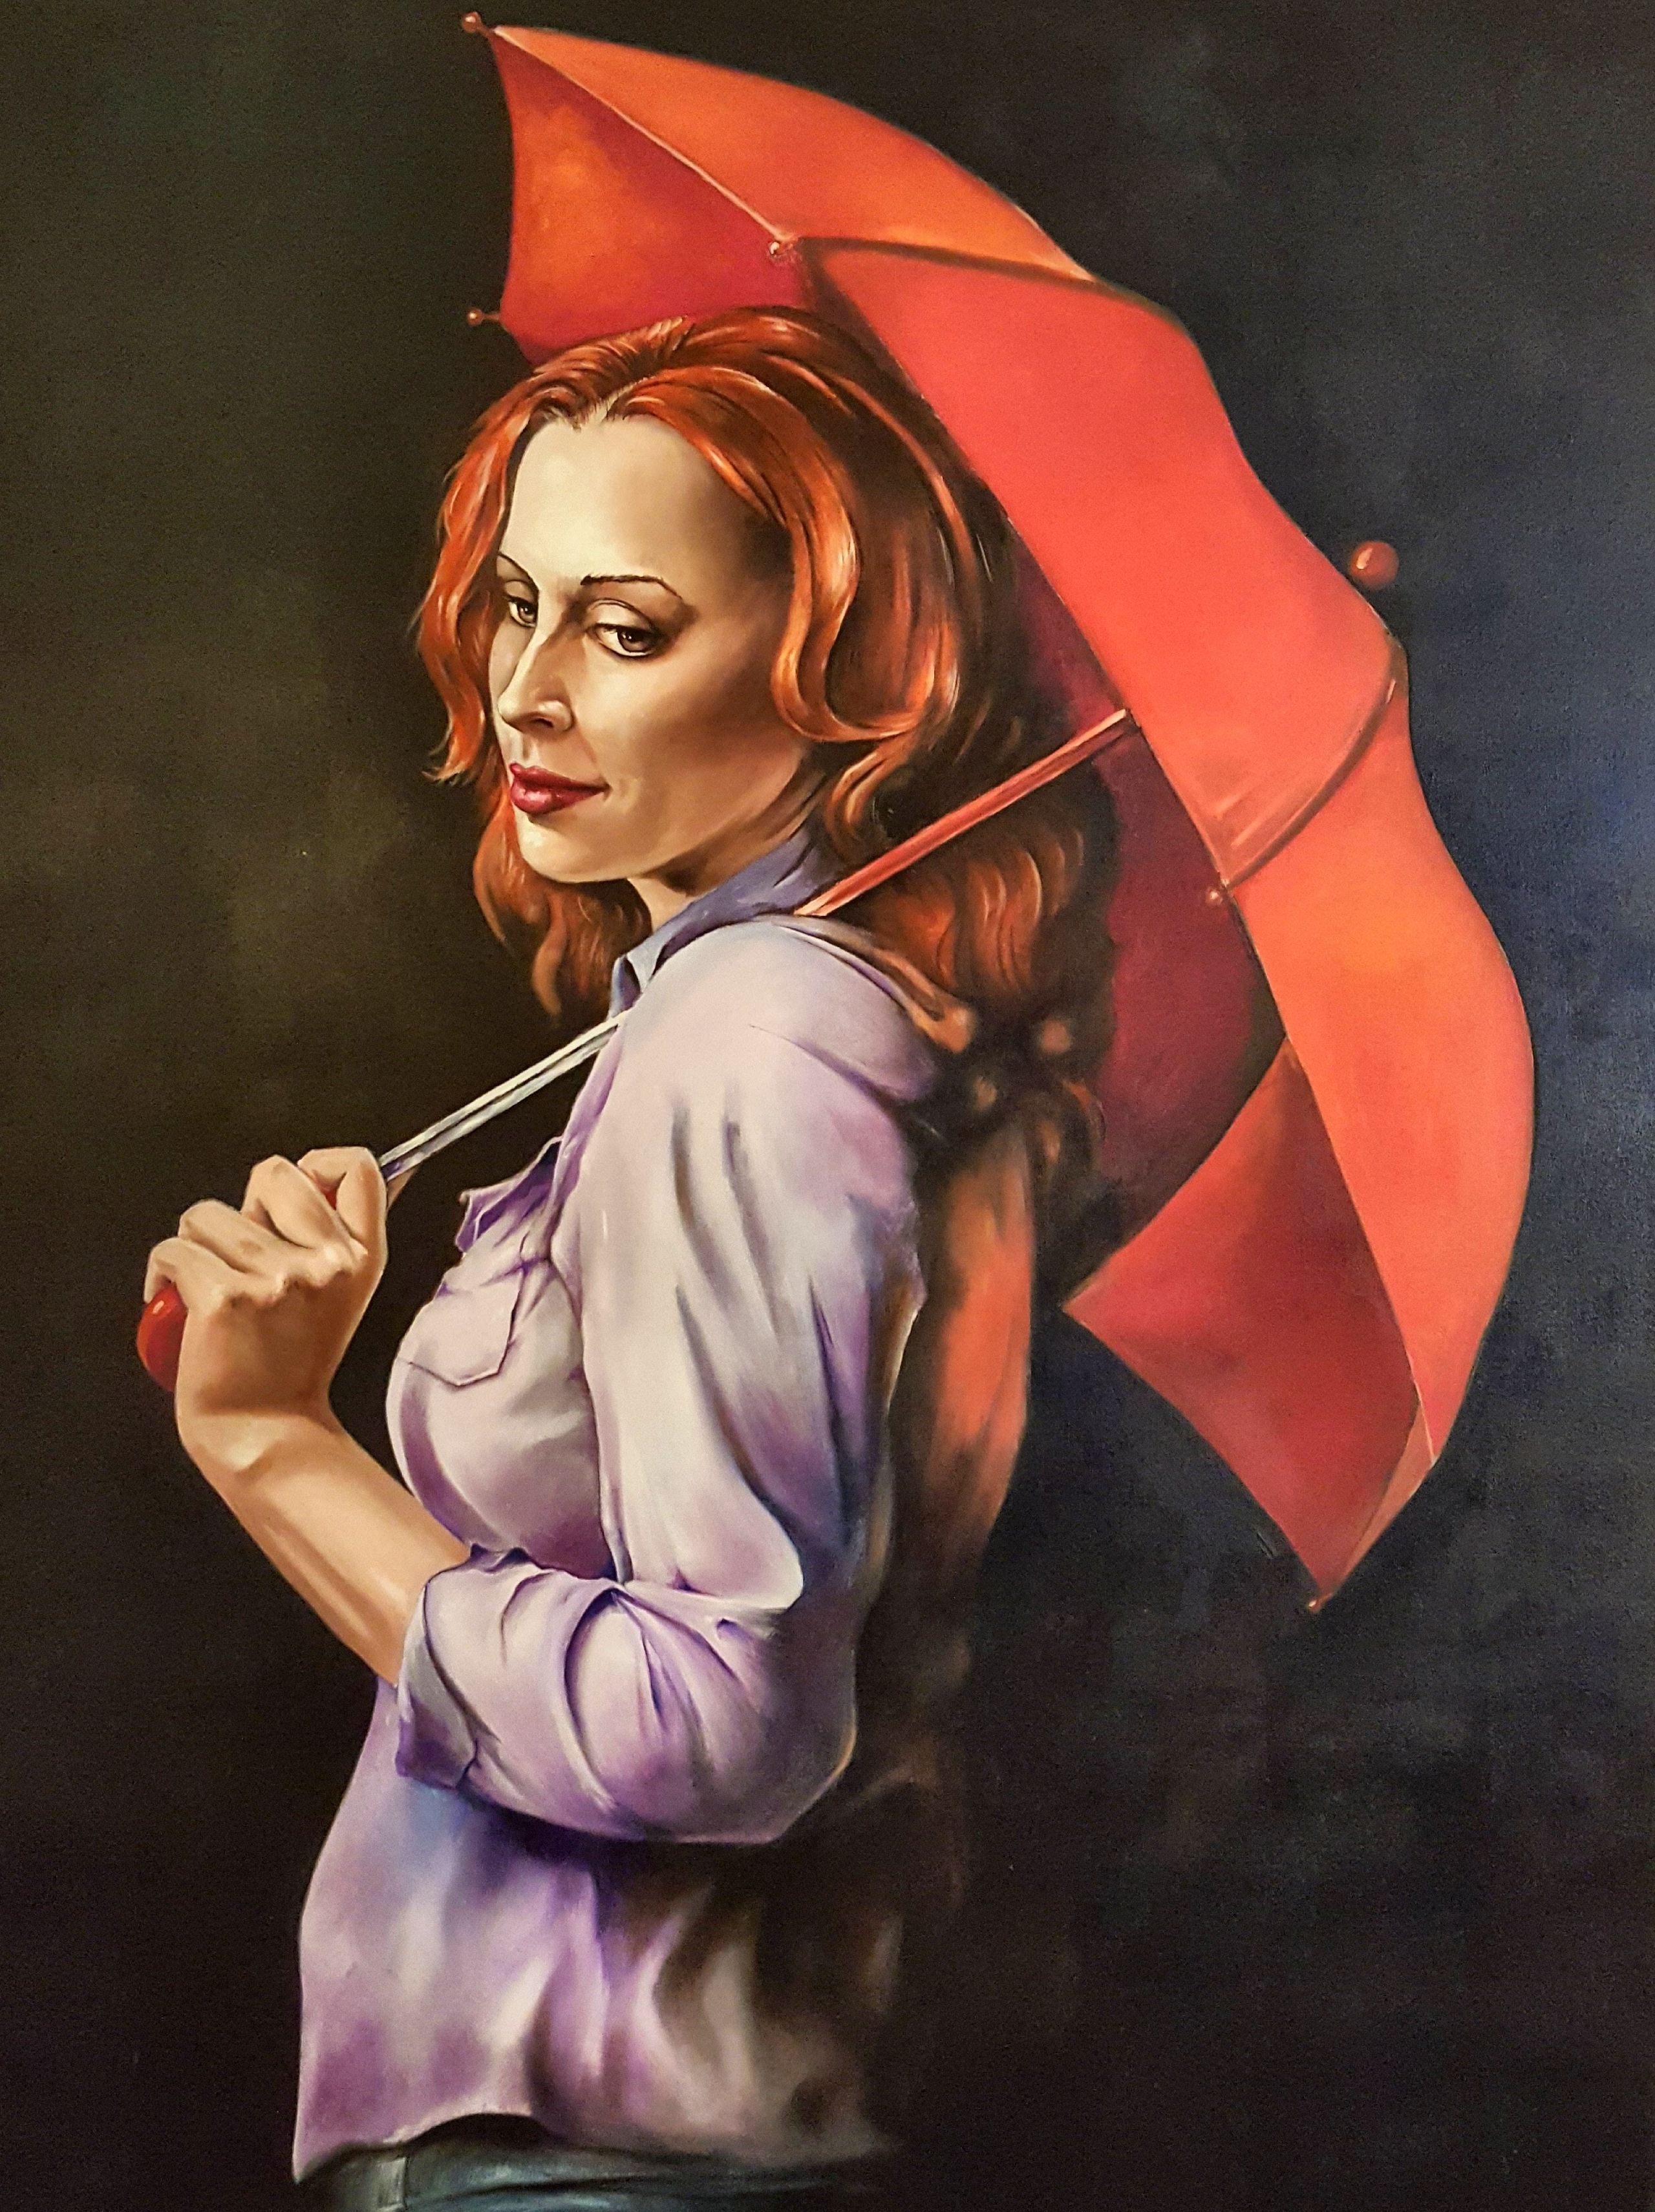 Woman With Umbrella Oil Painting By Michael Greiner At Art Works Richmond